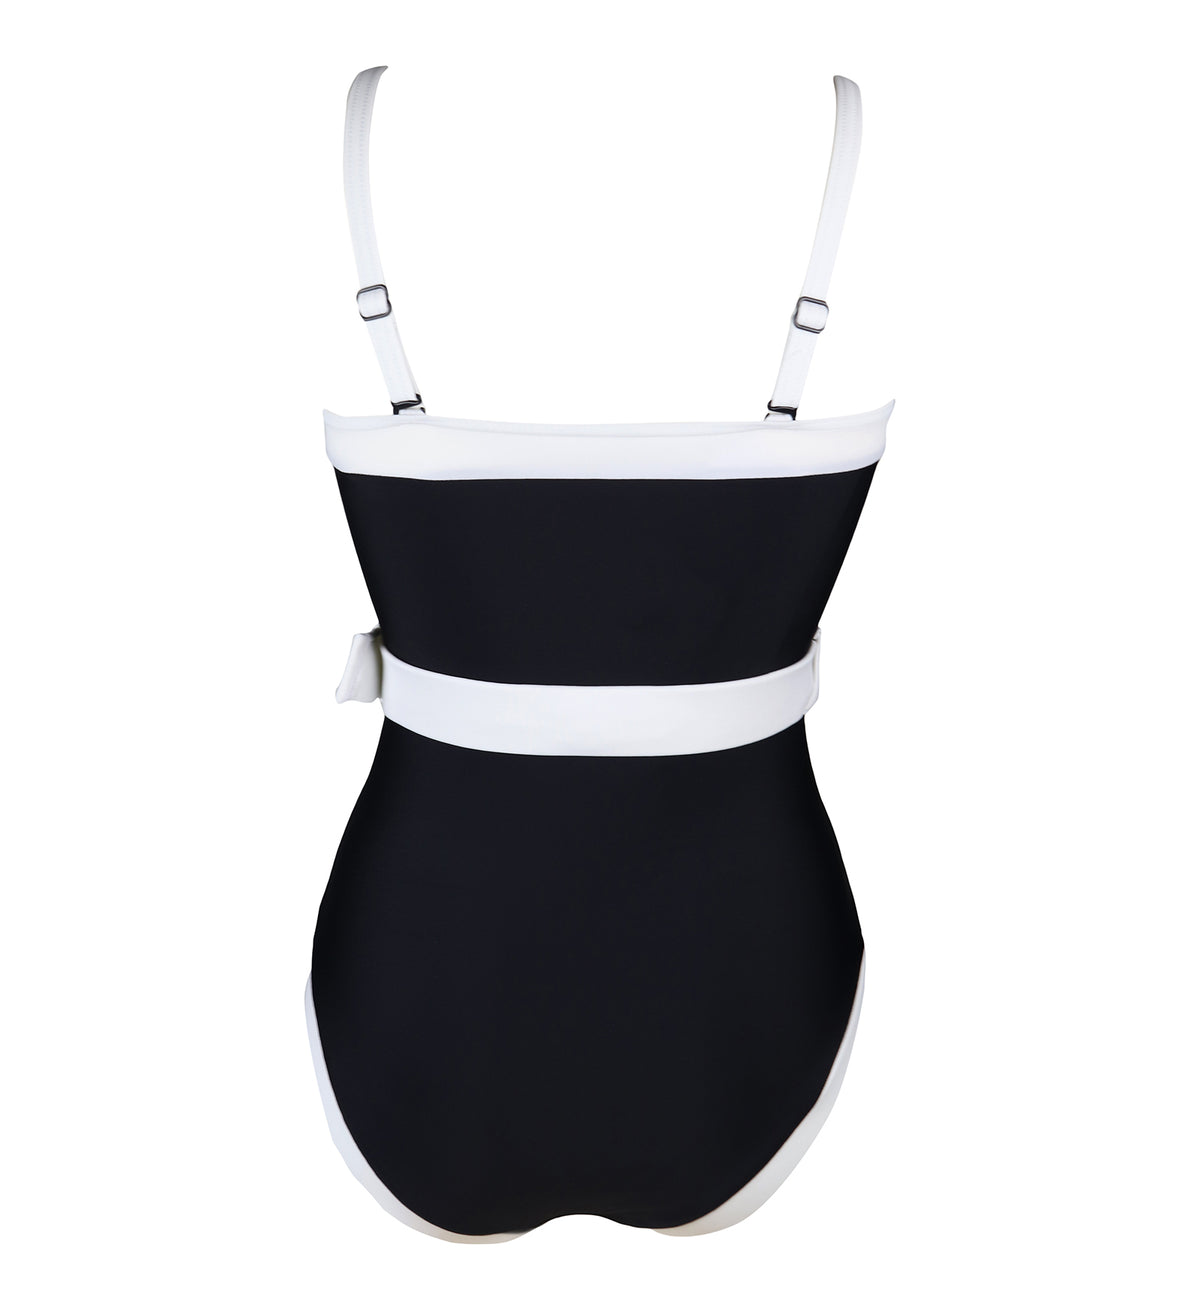 Pour Moi Removable Straps Belted Control Swimsuit (PM1414),Small,Black/White - Black/White,Small